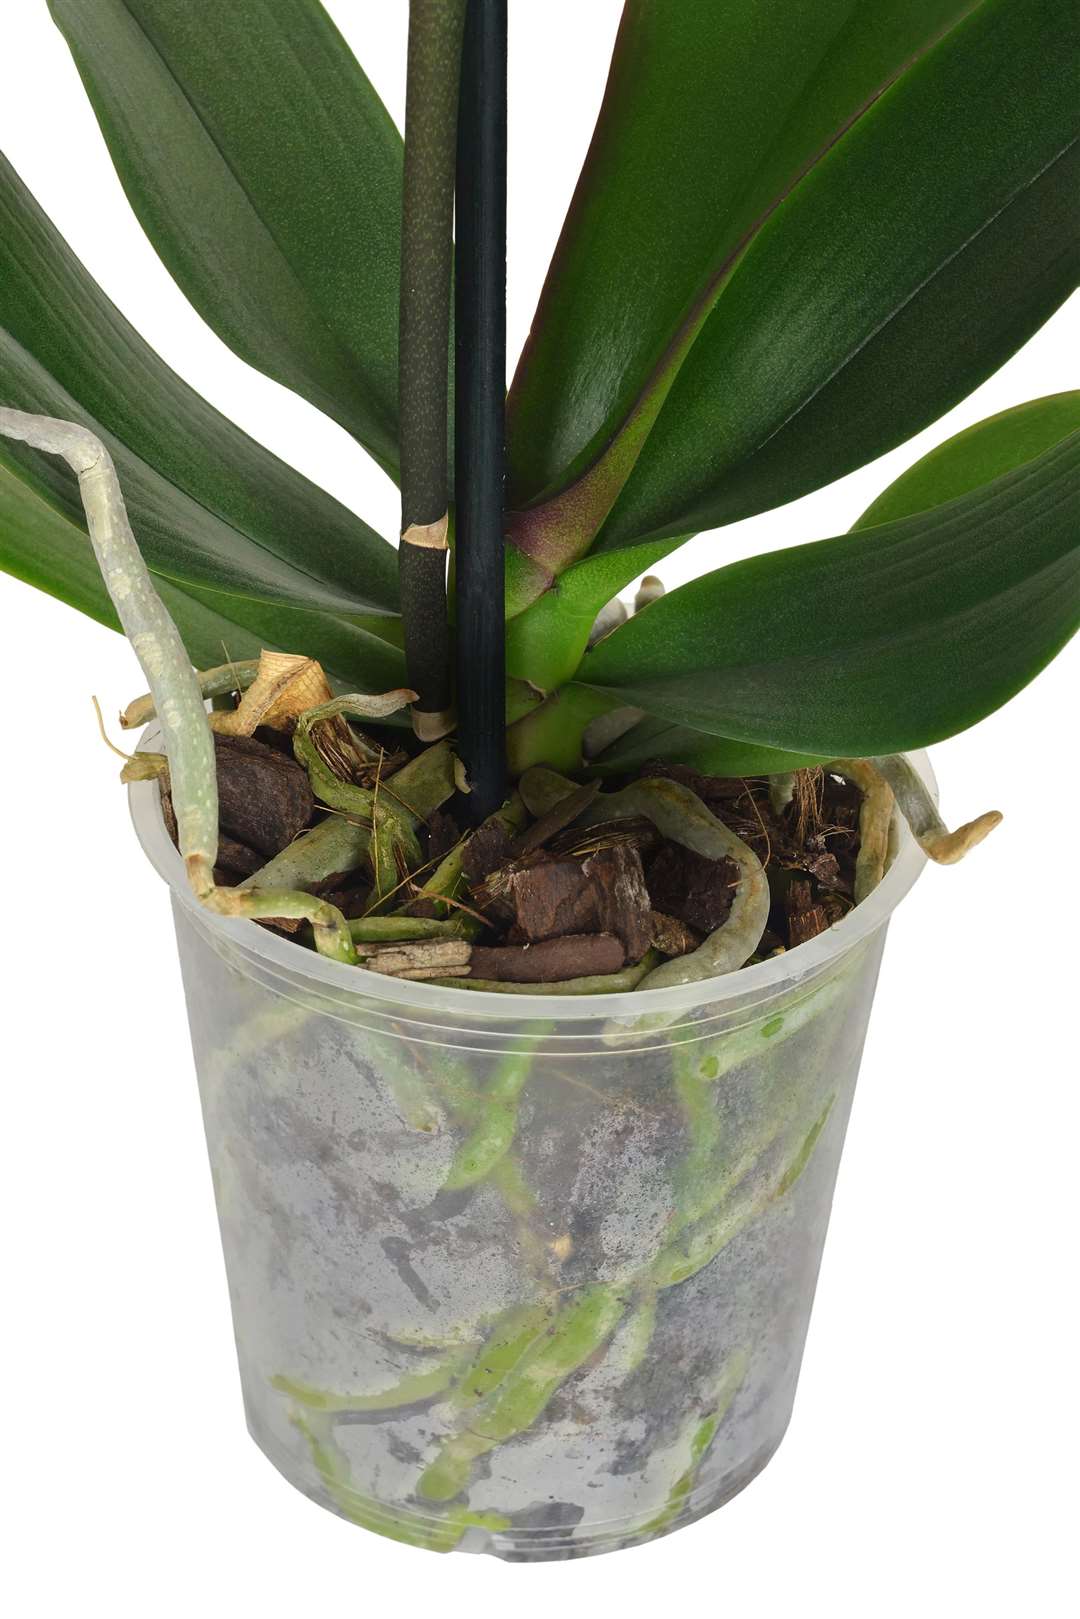 Healthy orchid roots should be plump and green. Picture: iStock/PA